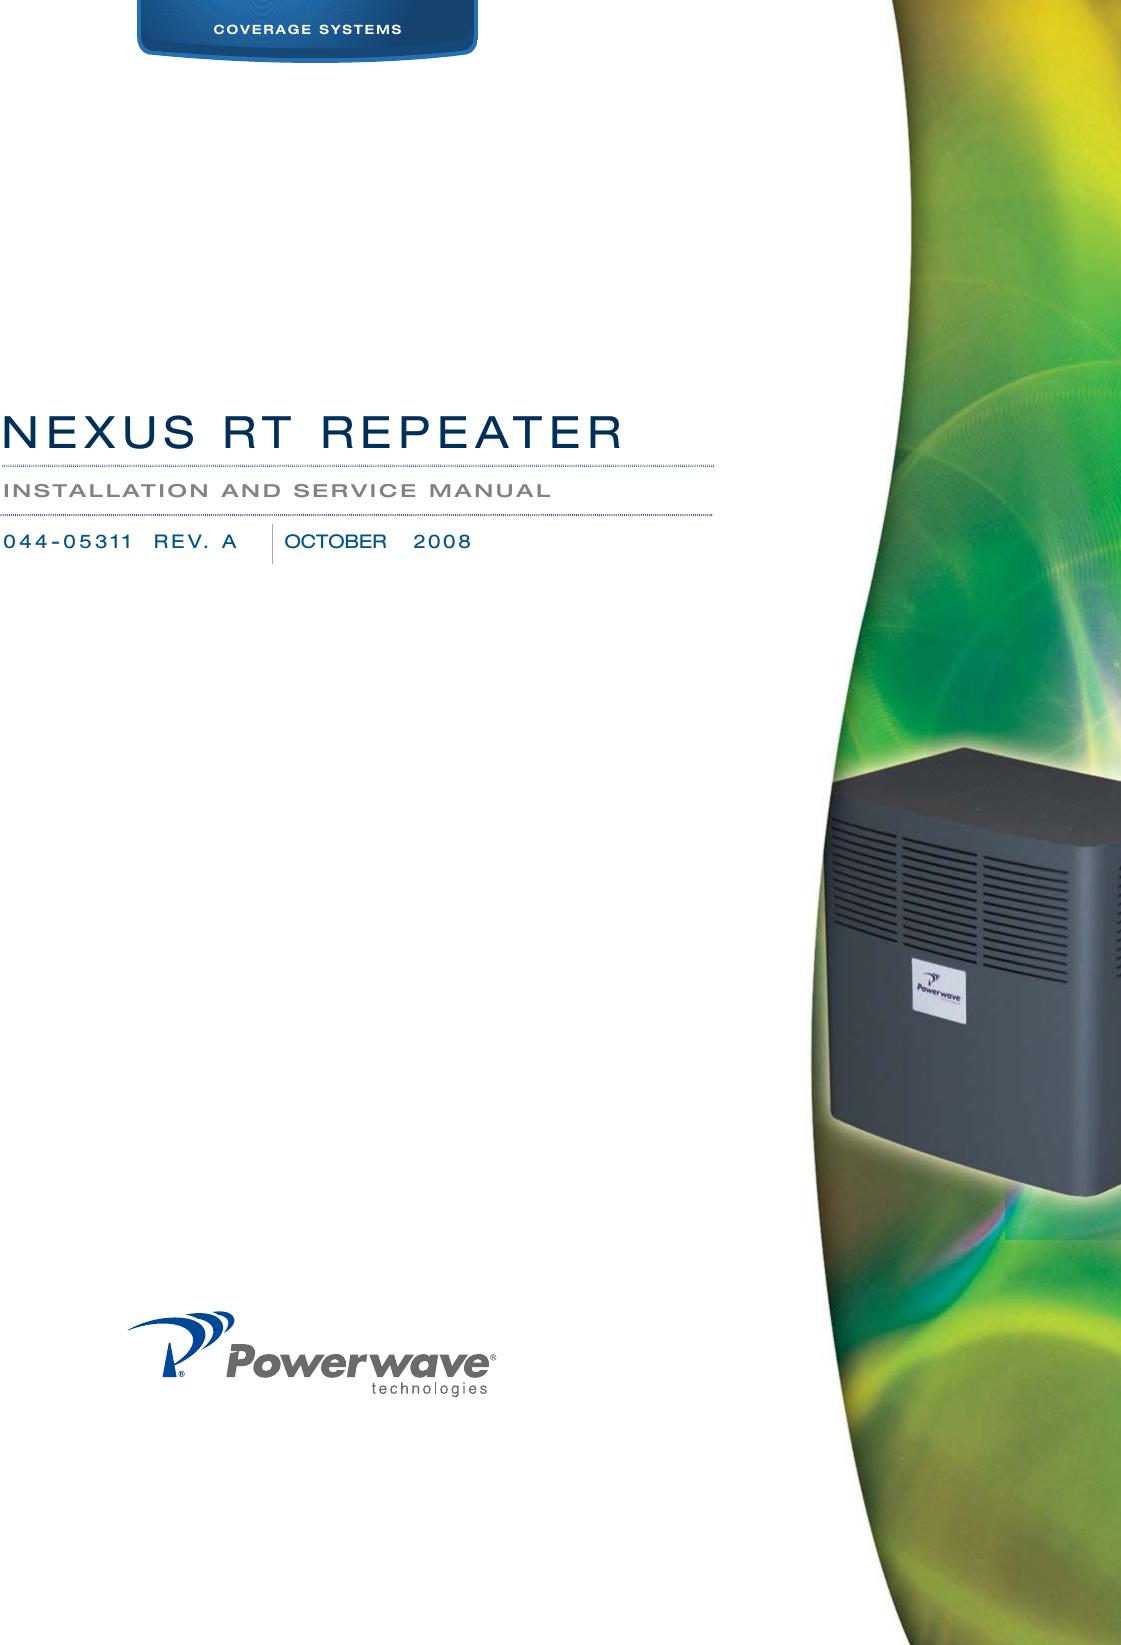 COVERAGE SYSTEMSINSTALLATION AND SERVICE MANUALNEXUS RT REPEATER044-05311  REV. A     OCTOBER 2 0 0 8      